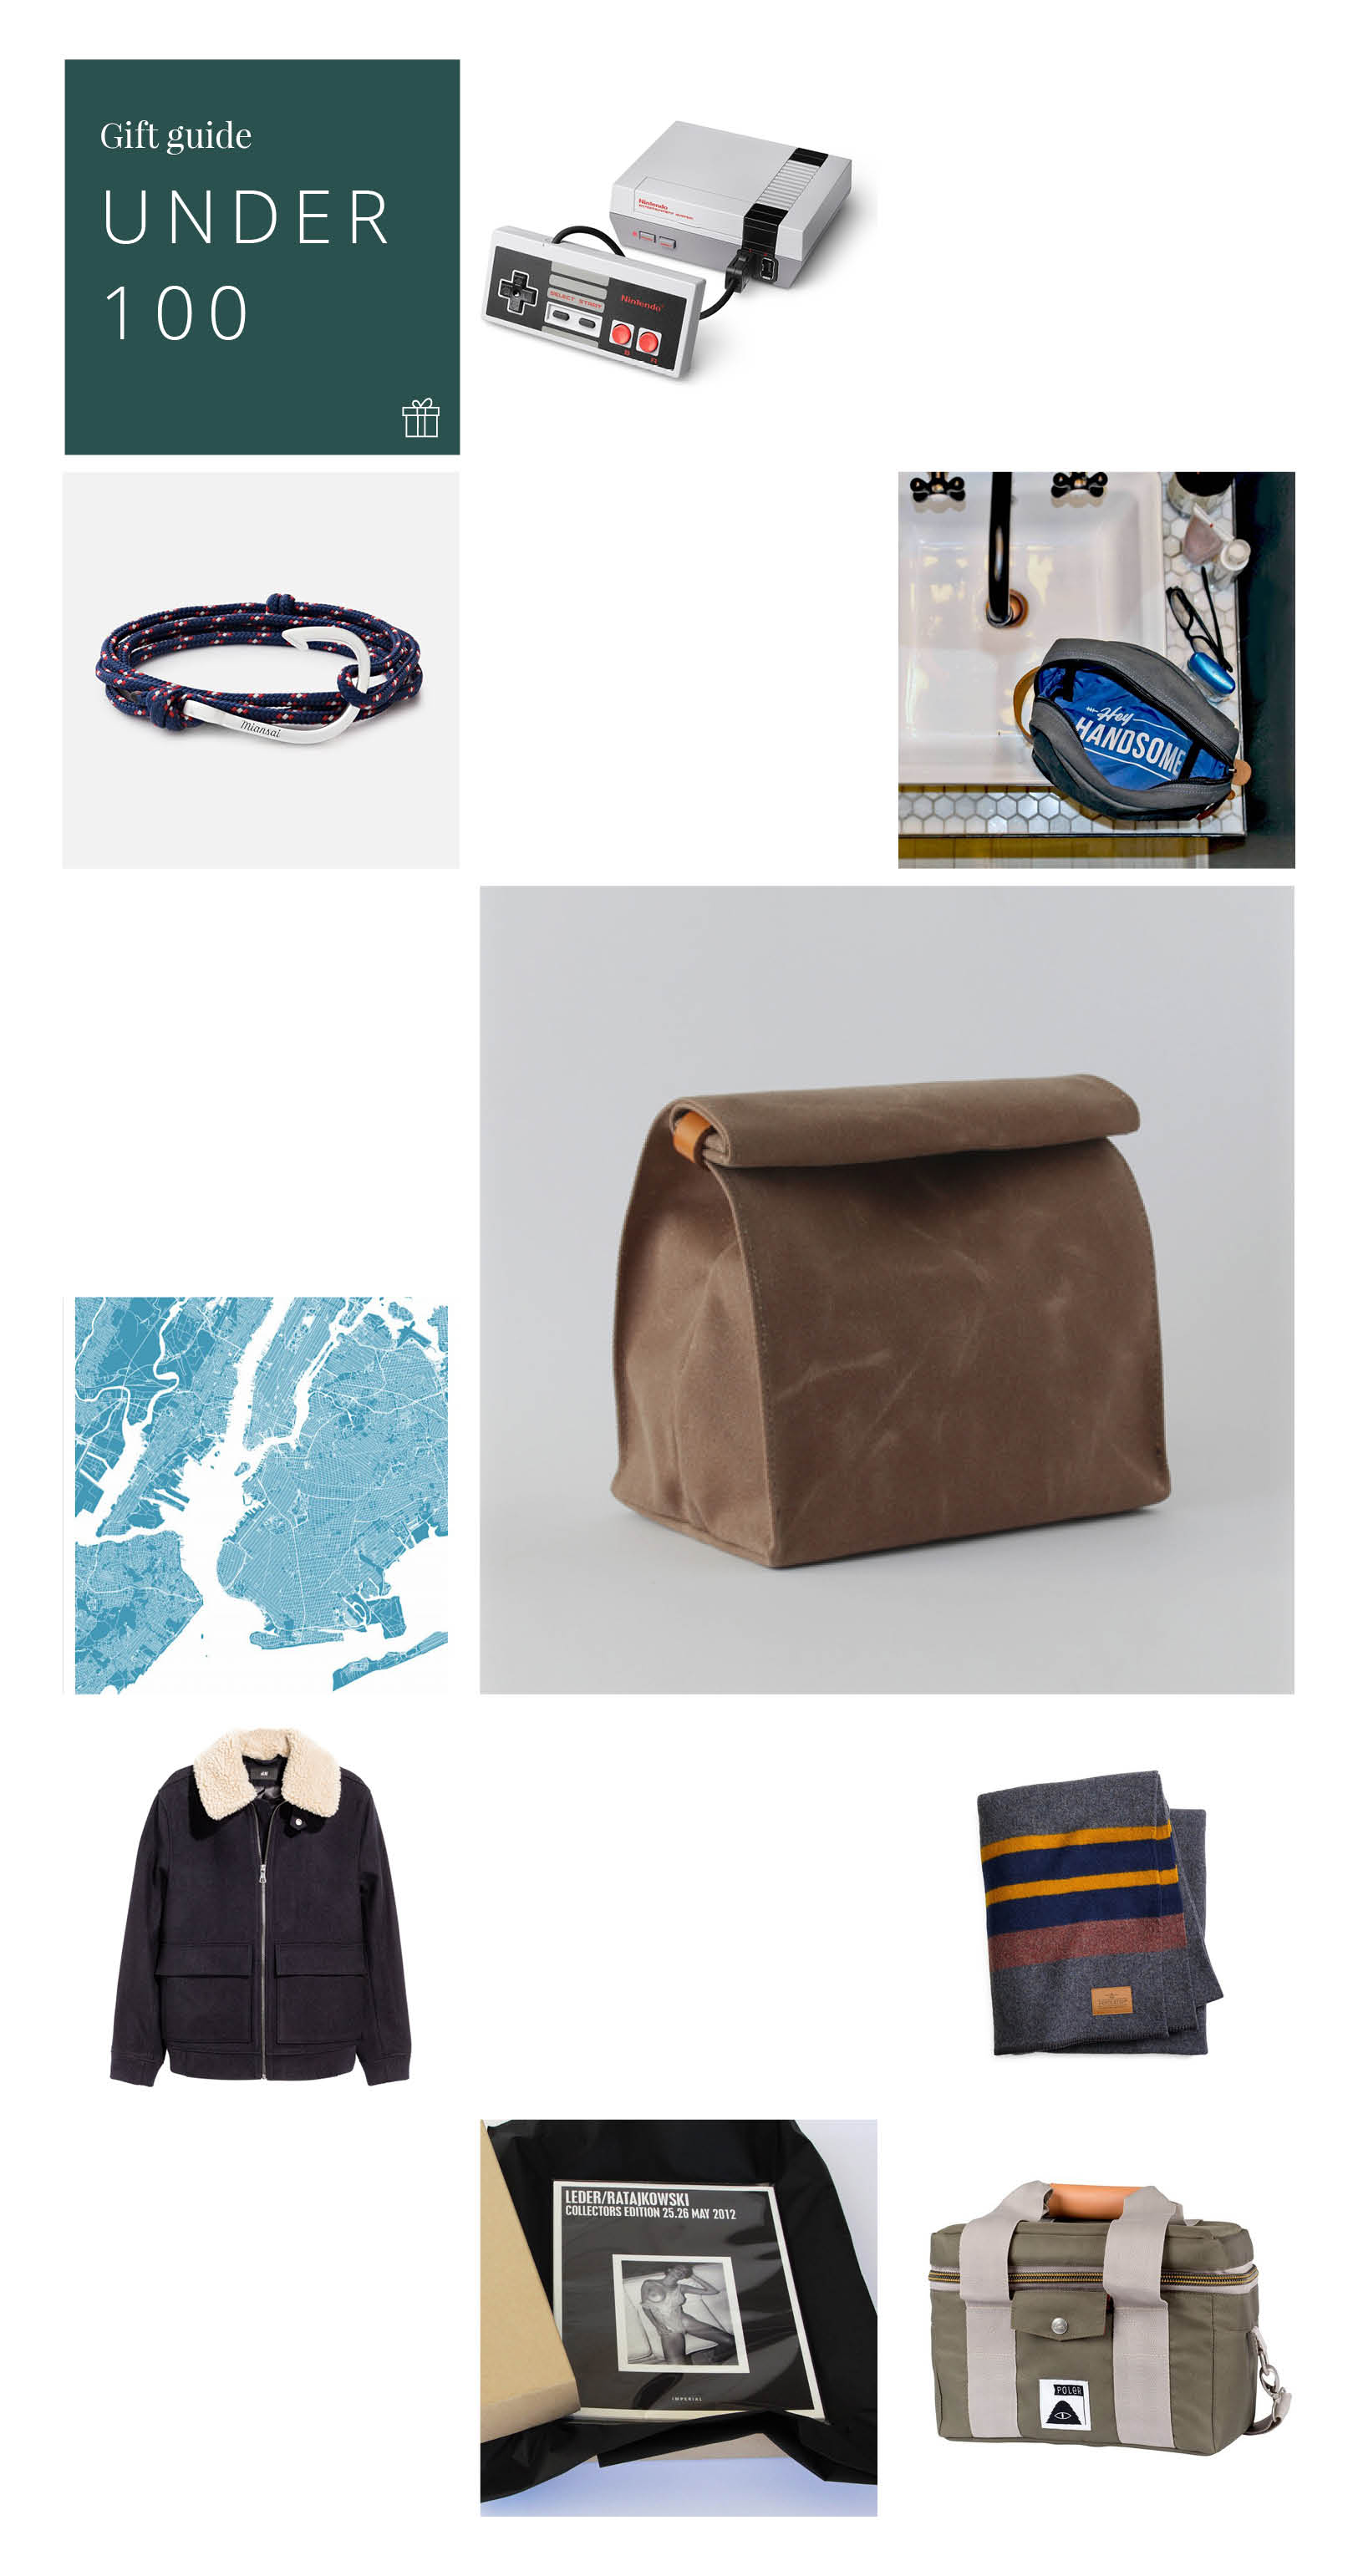 The Gem Picker has brought together a gift guide for the man in your life